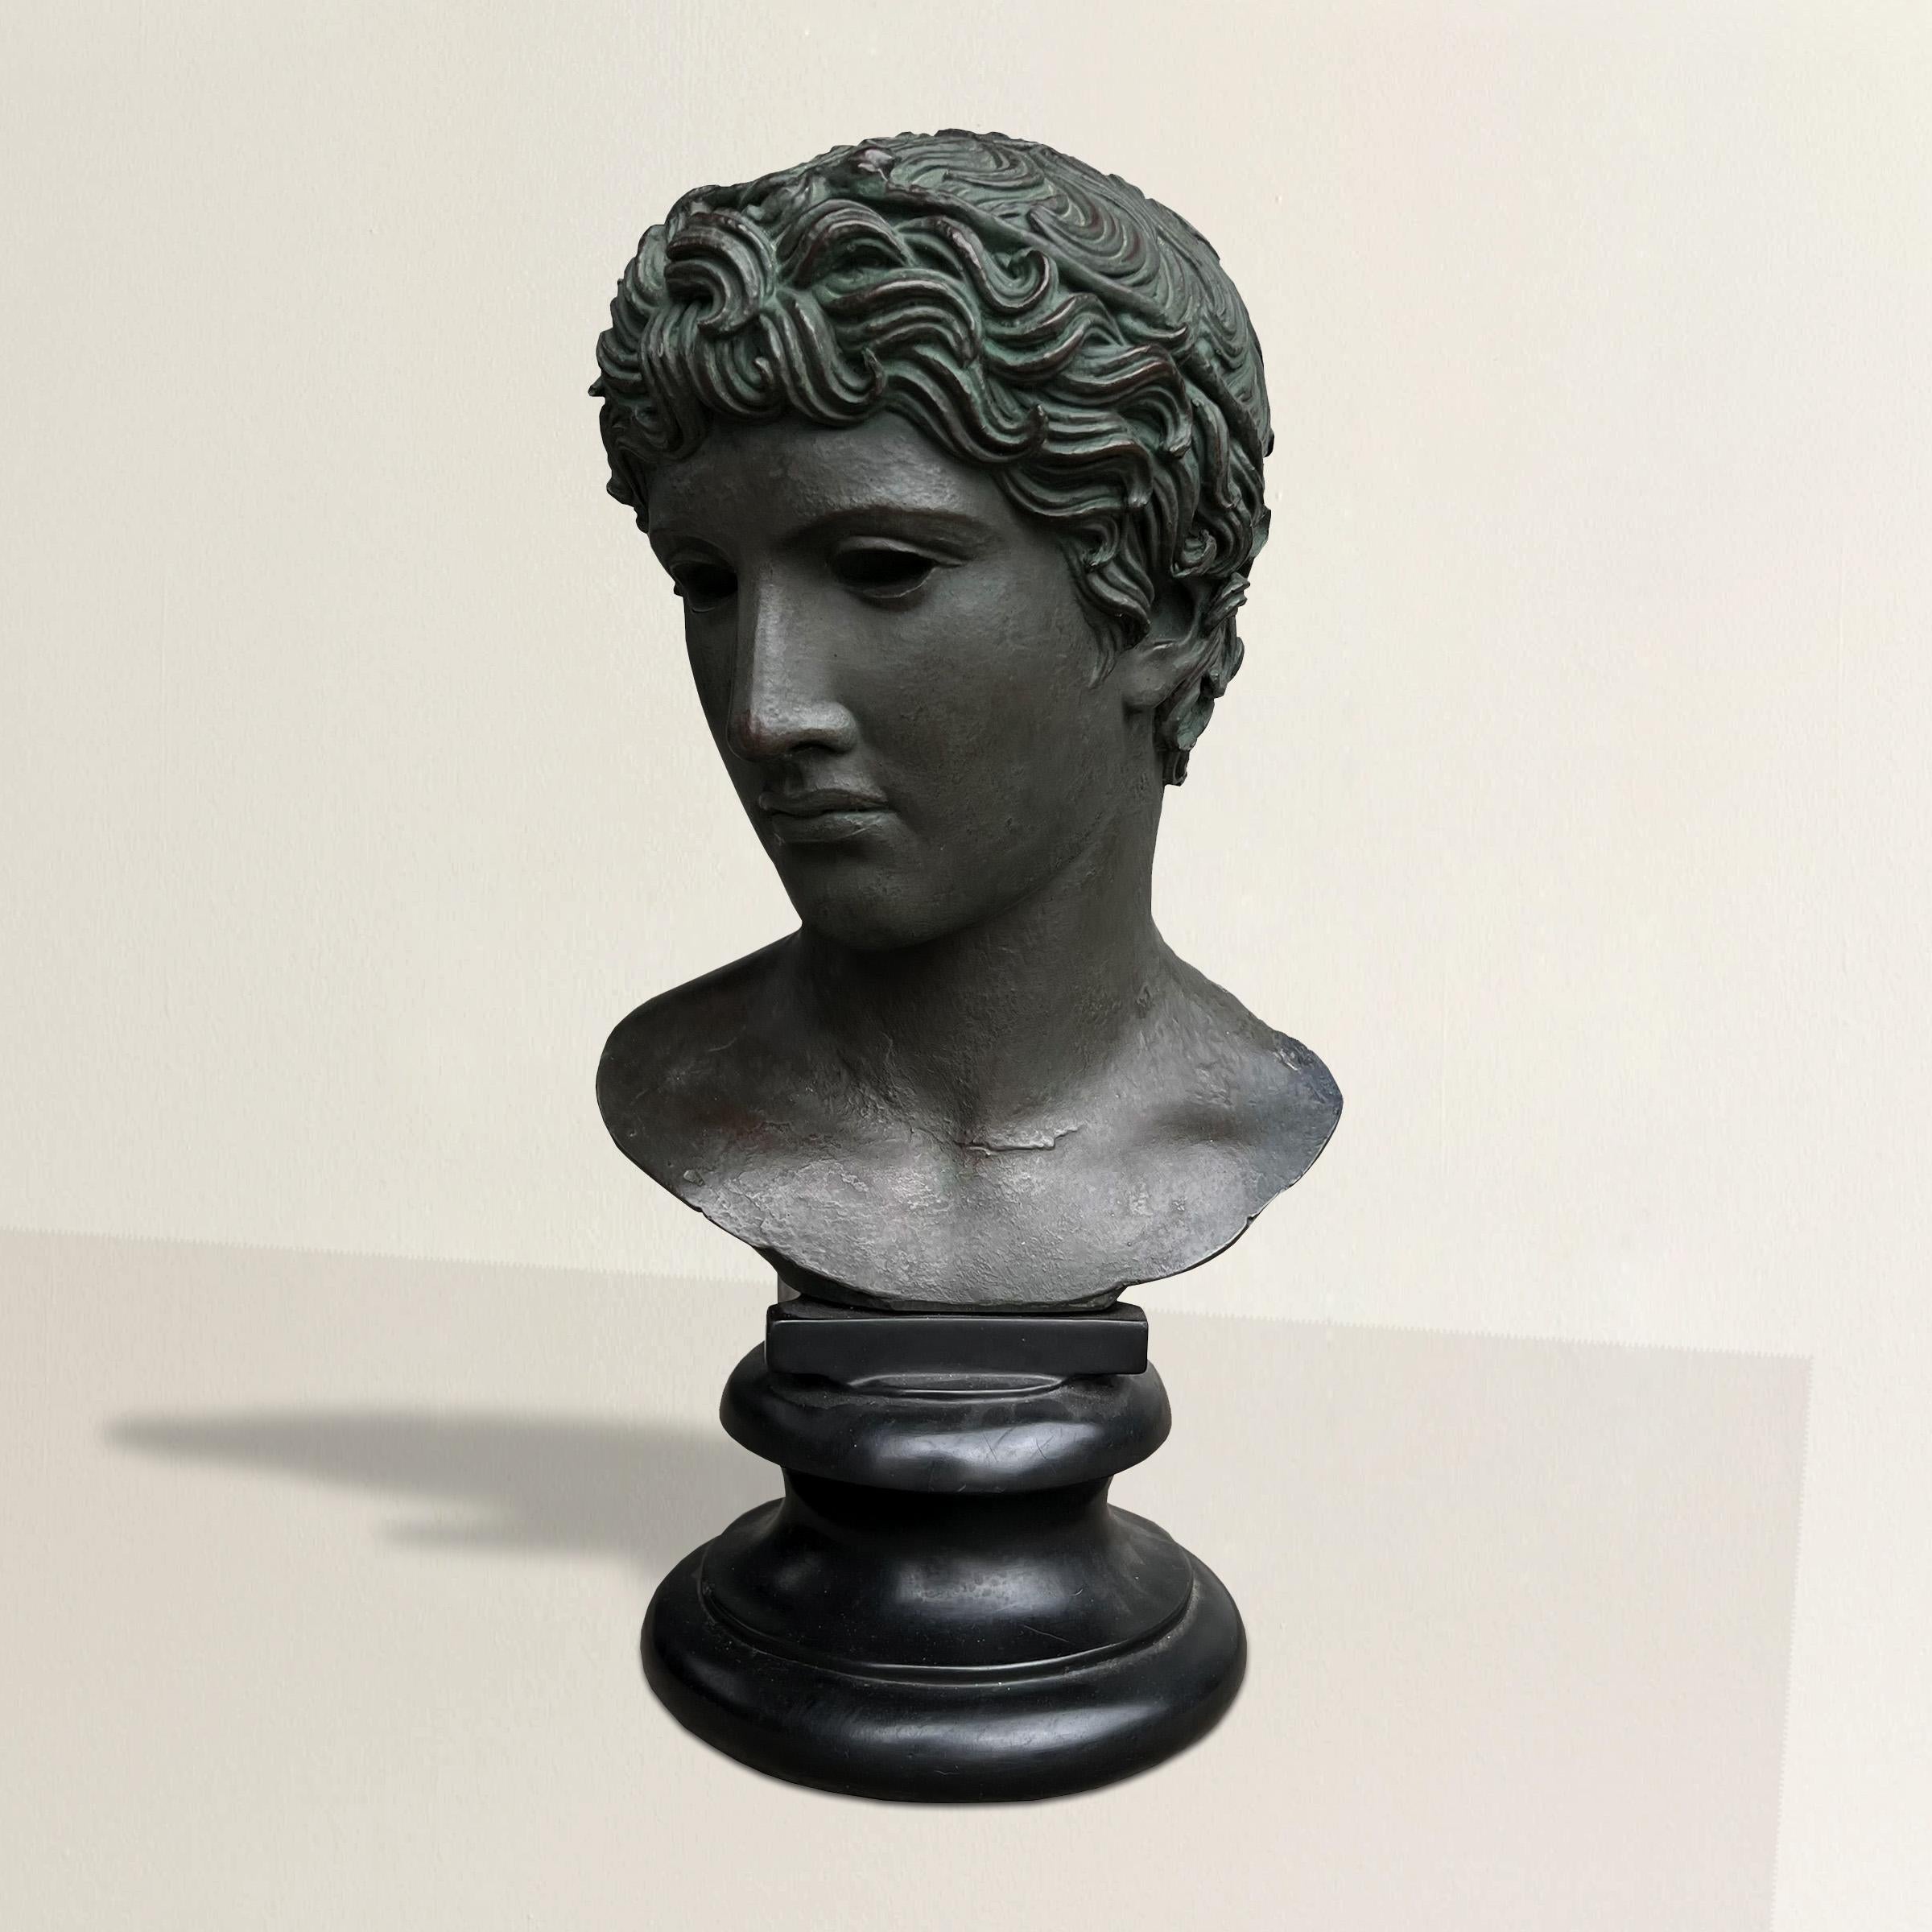 Capture the essence of Hellenistic artistry with our exquisite reproduction of the famed 